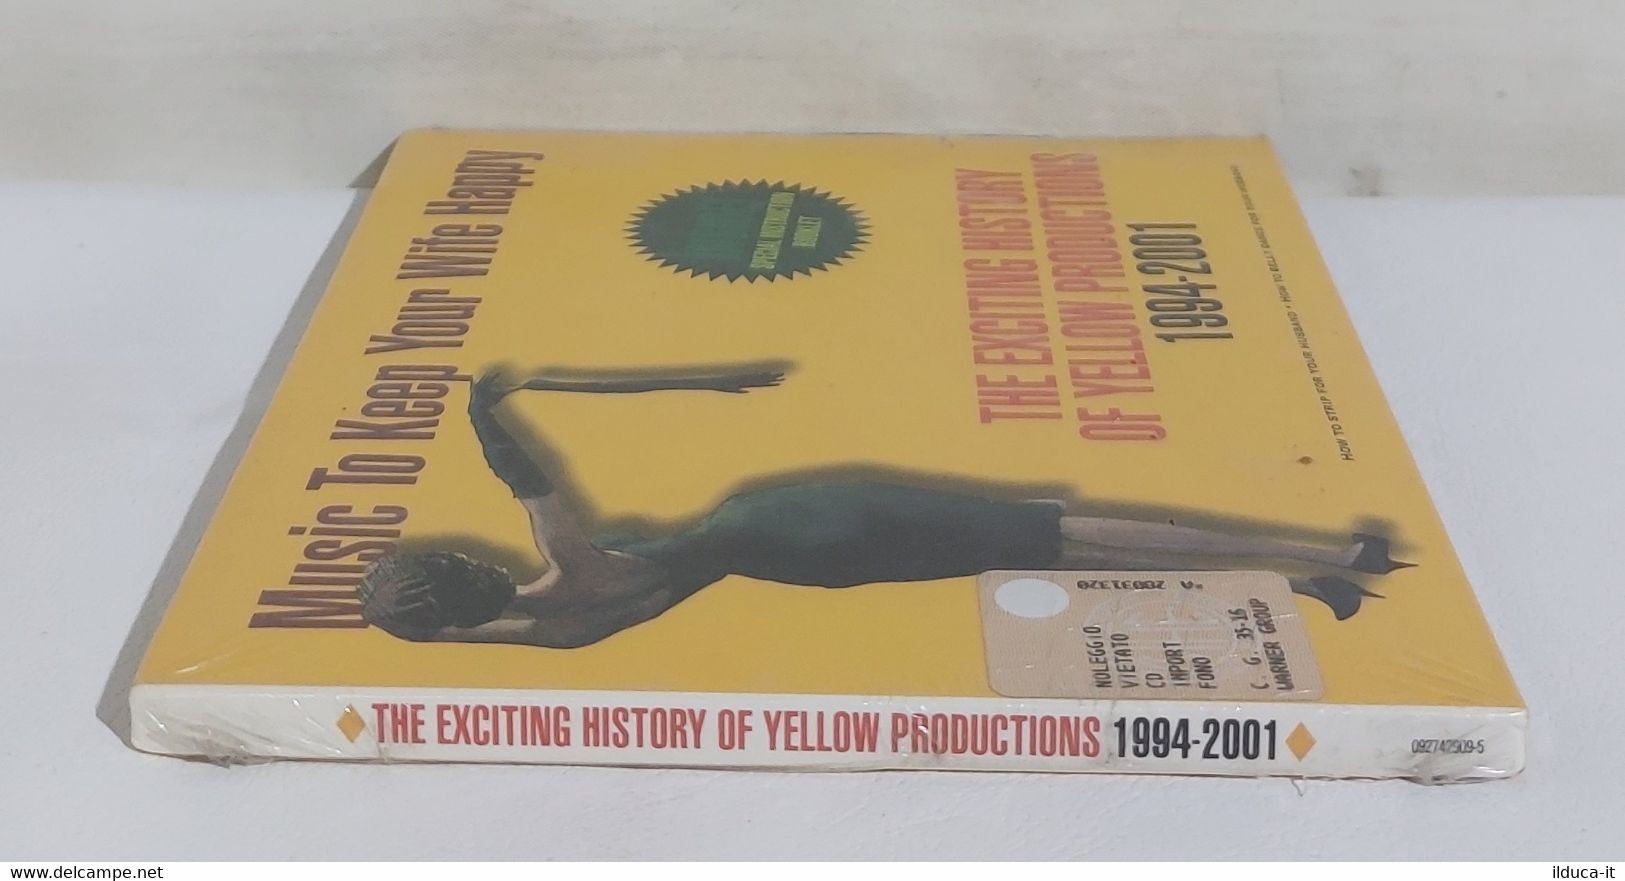 I109213 CD - The Exciting History Of Yellow Productions 1994-2001 - SIGILLATO - Dance, Techno En House